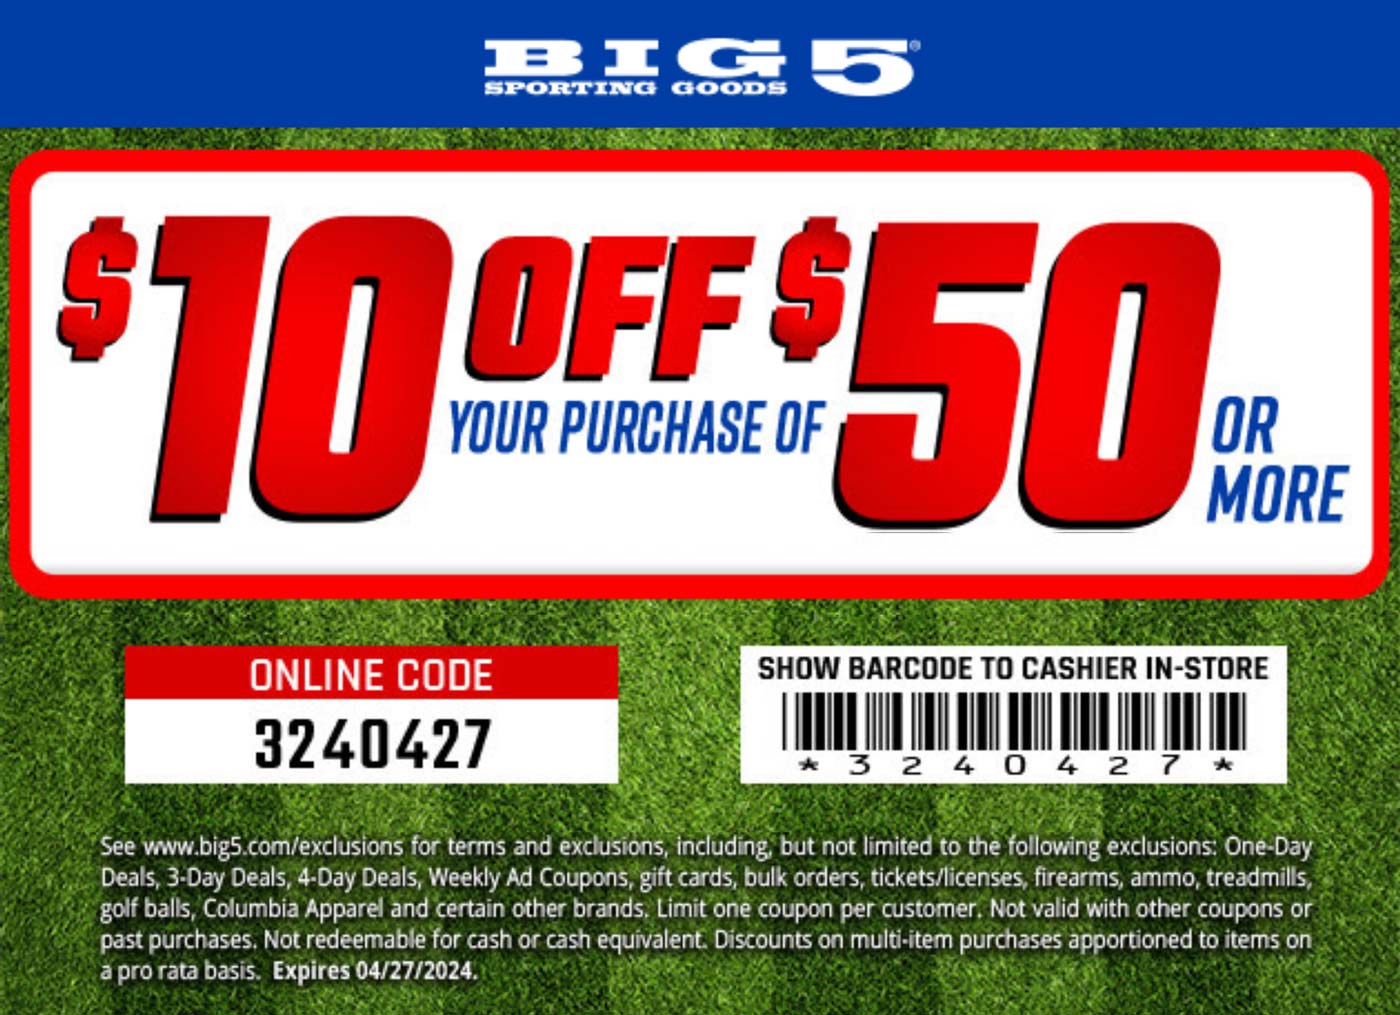 Big 5 stores Coupon  $10 off $50 today at Big 5 sporting goods, or online via promo code 3240427 #big5 